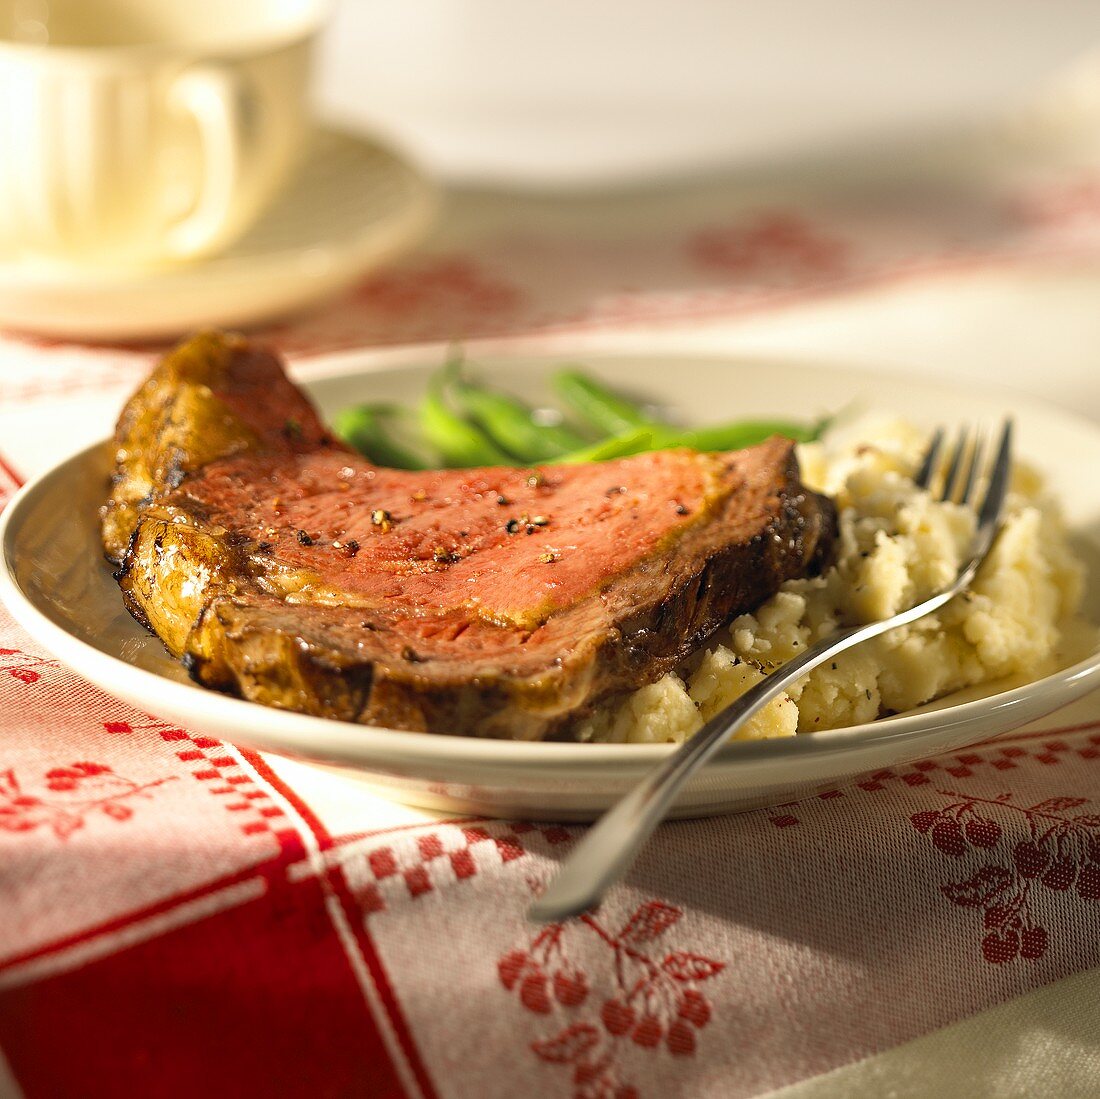 Beef steak with mashed potato and green beans